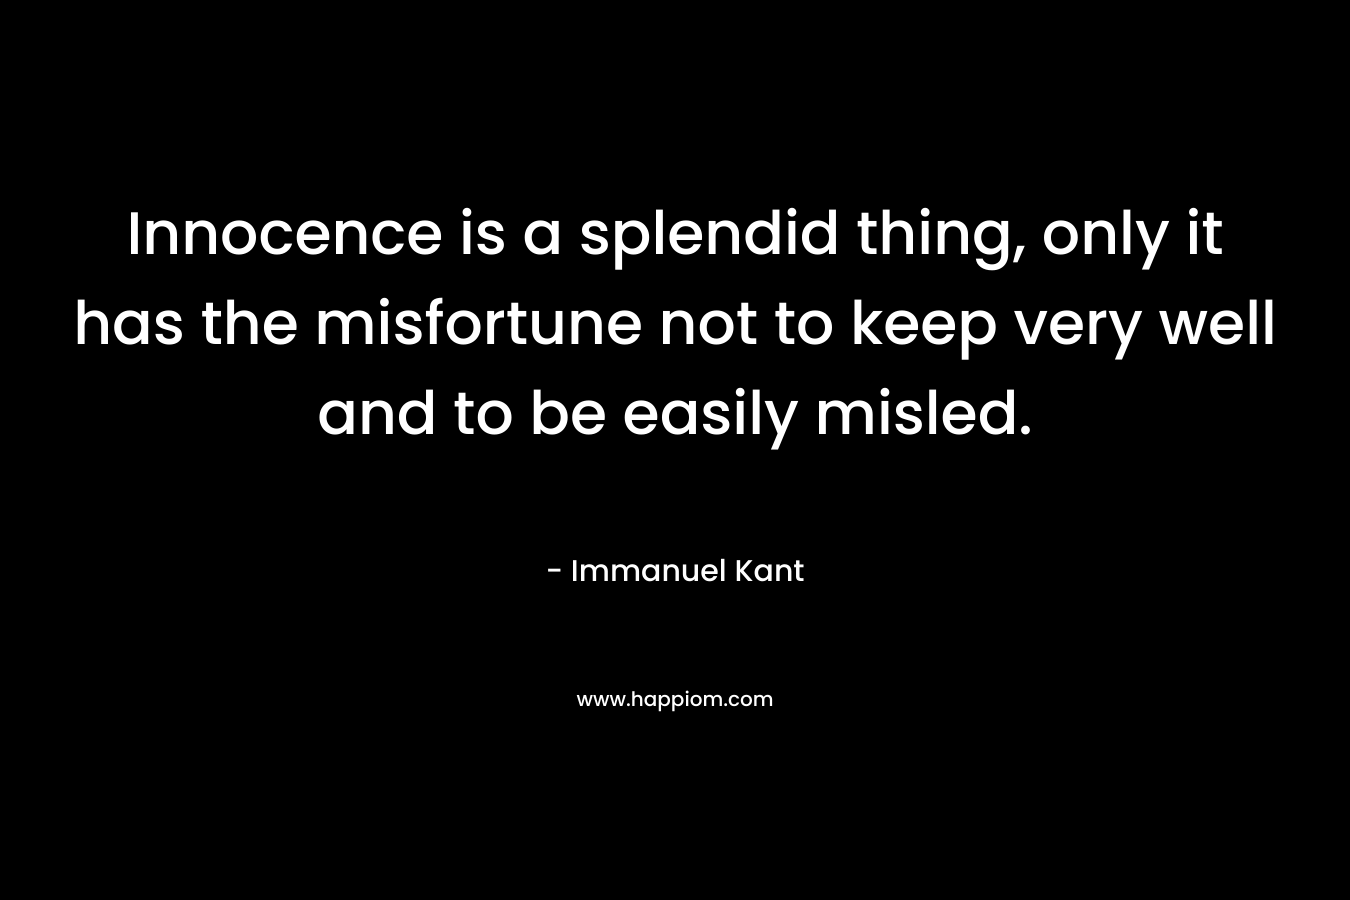 Innocence is a splendid thing, only it has the misfortune not to keep very well and to be easily misled.